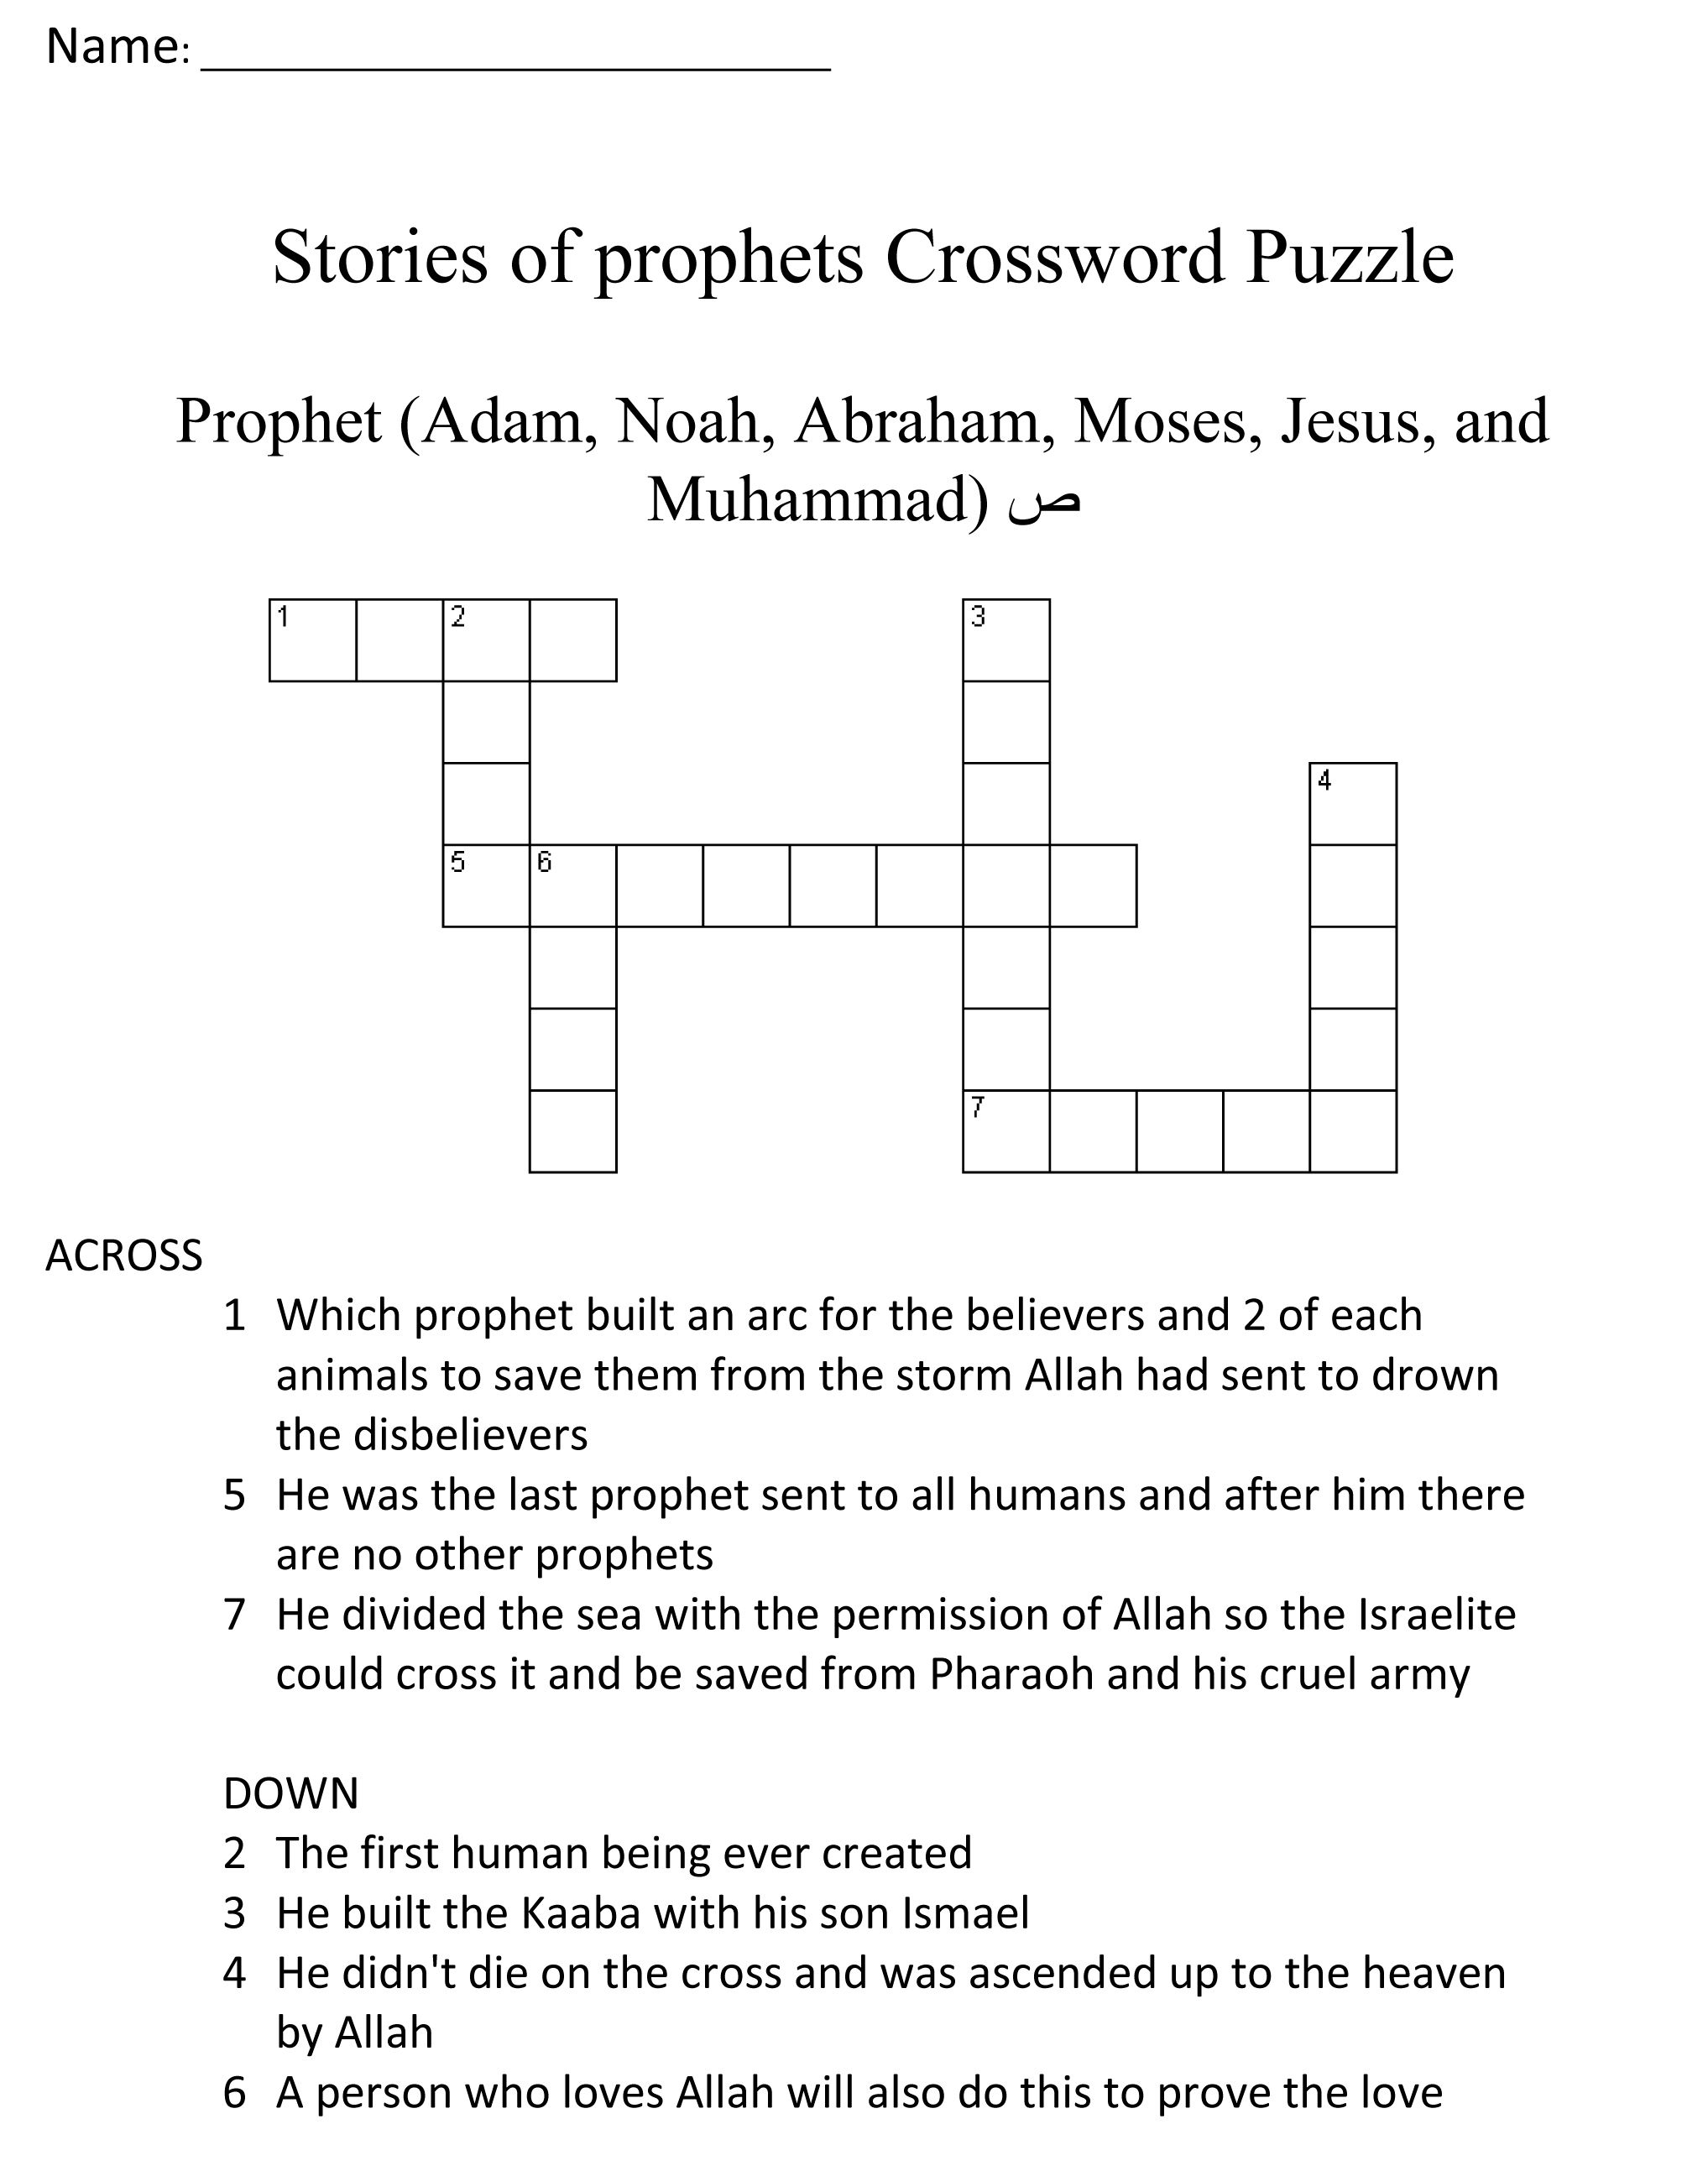 Prophets Crossword Puzzle | Little Followers Of Ahlul-Bayt - Islamic Crossword Puzzles Printable